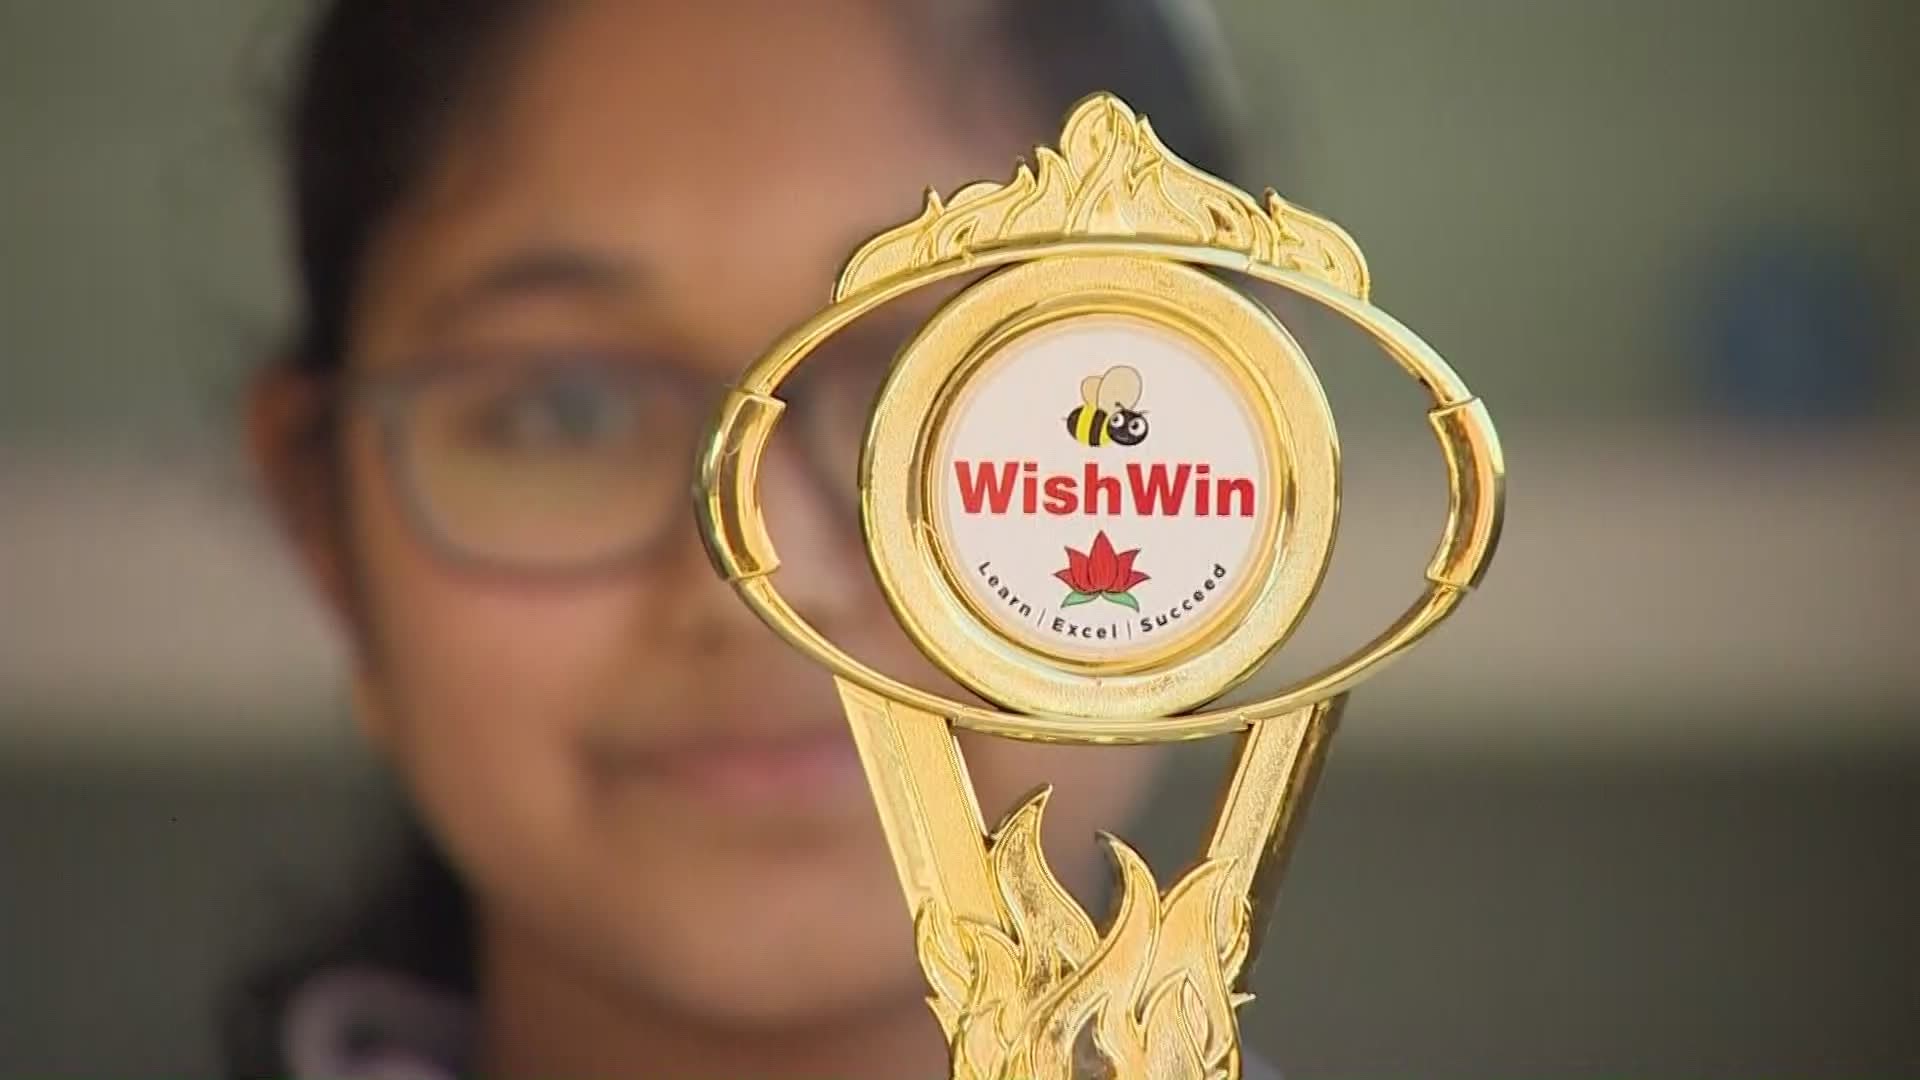 Sanjana Kota is one of thousands of kids across the country devastated by the news that this year's Scripps National Spelling Bee has been canceled.